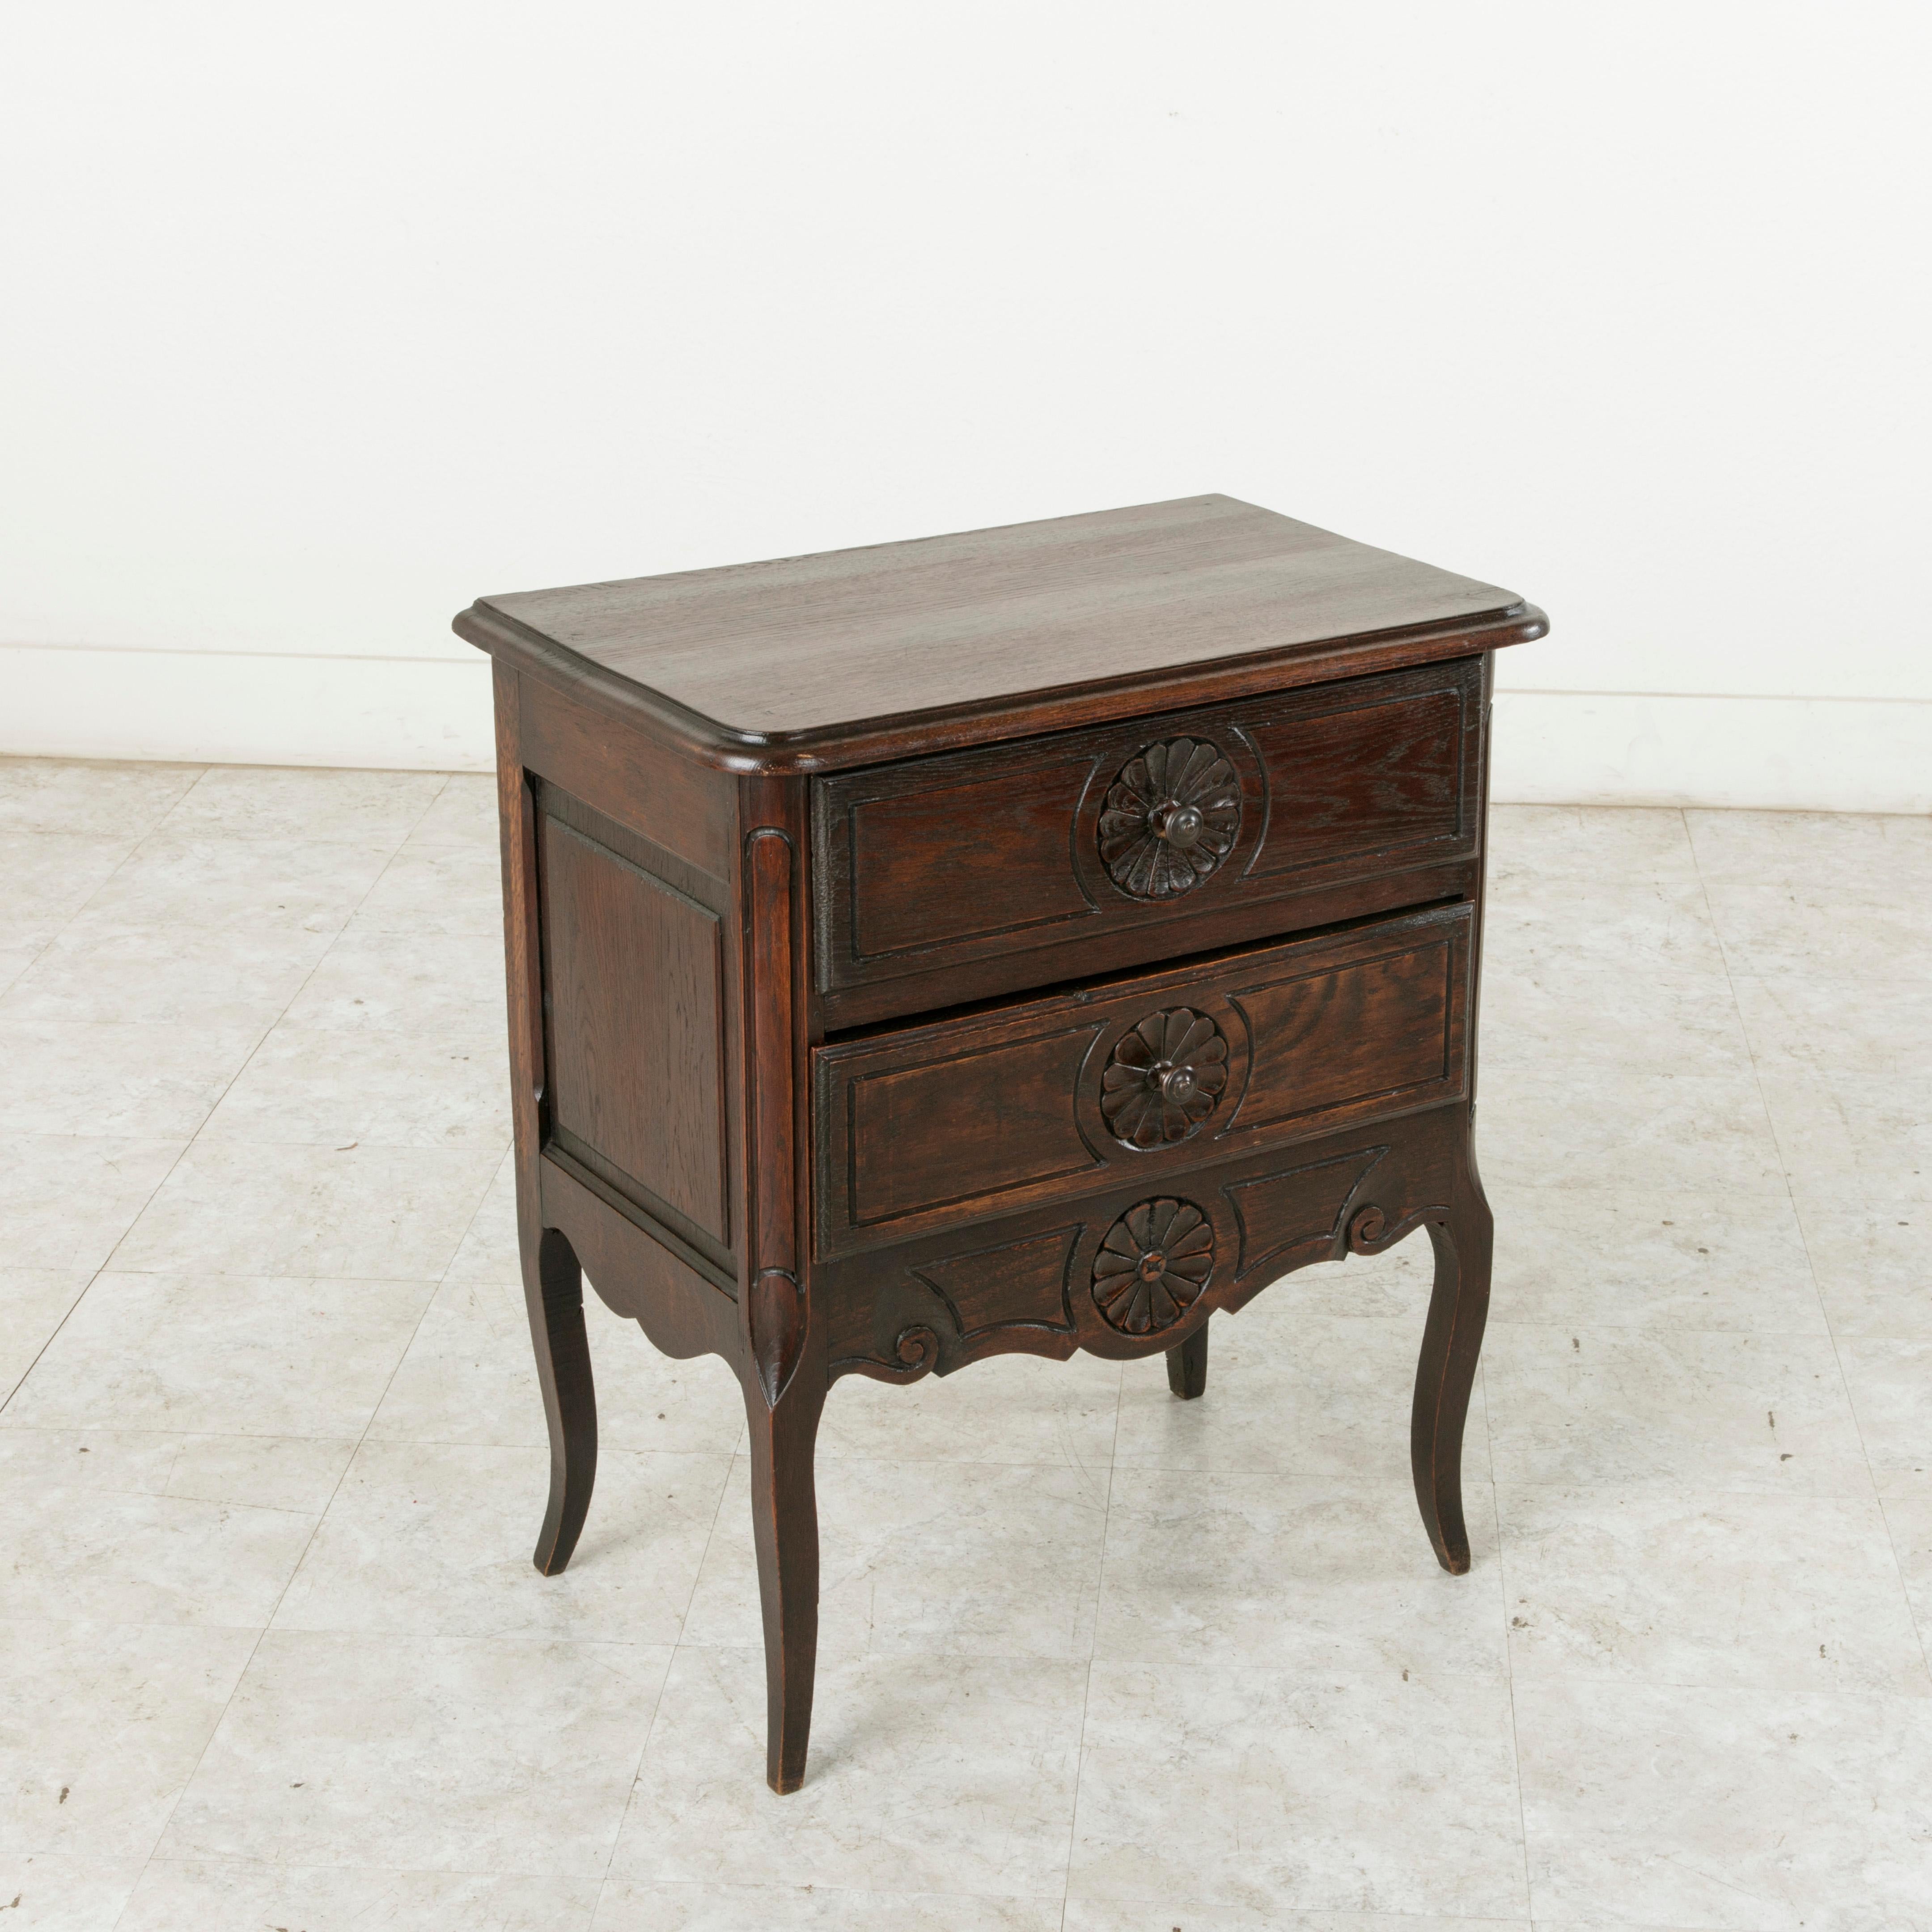 This early 20th century French Louis XV style small-scale oak commode or chest features hand-carved rosettes on its two drawer fronts around the iron drawer pulls and a carved rosette in the lower apron. The beveled top and paneled sides of the